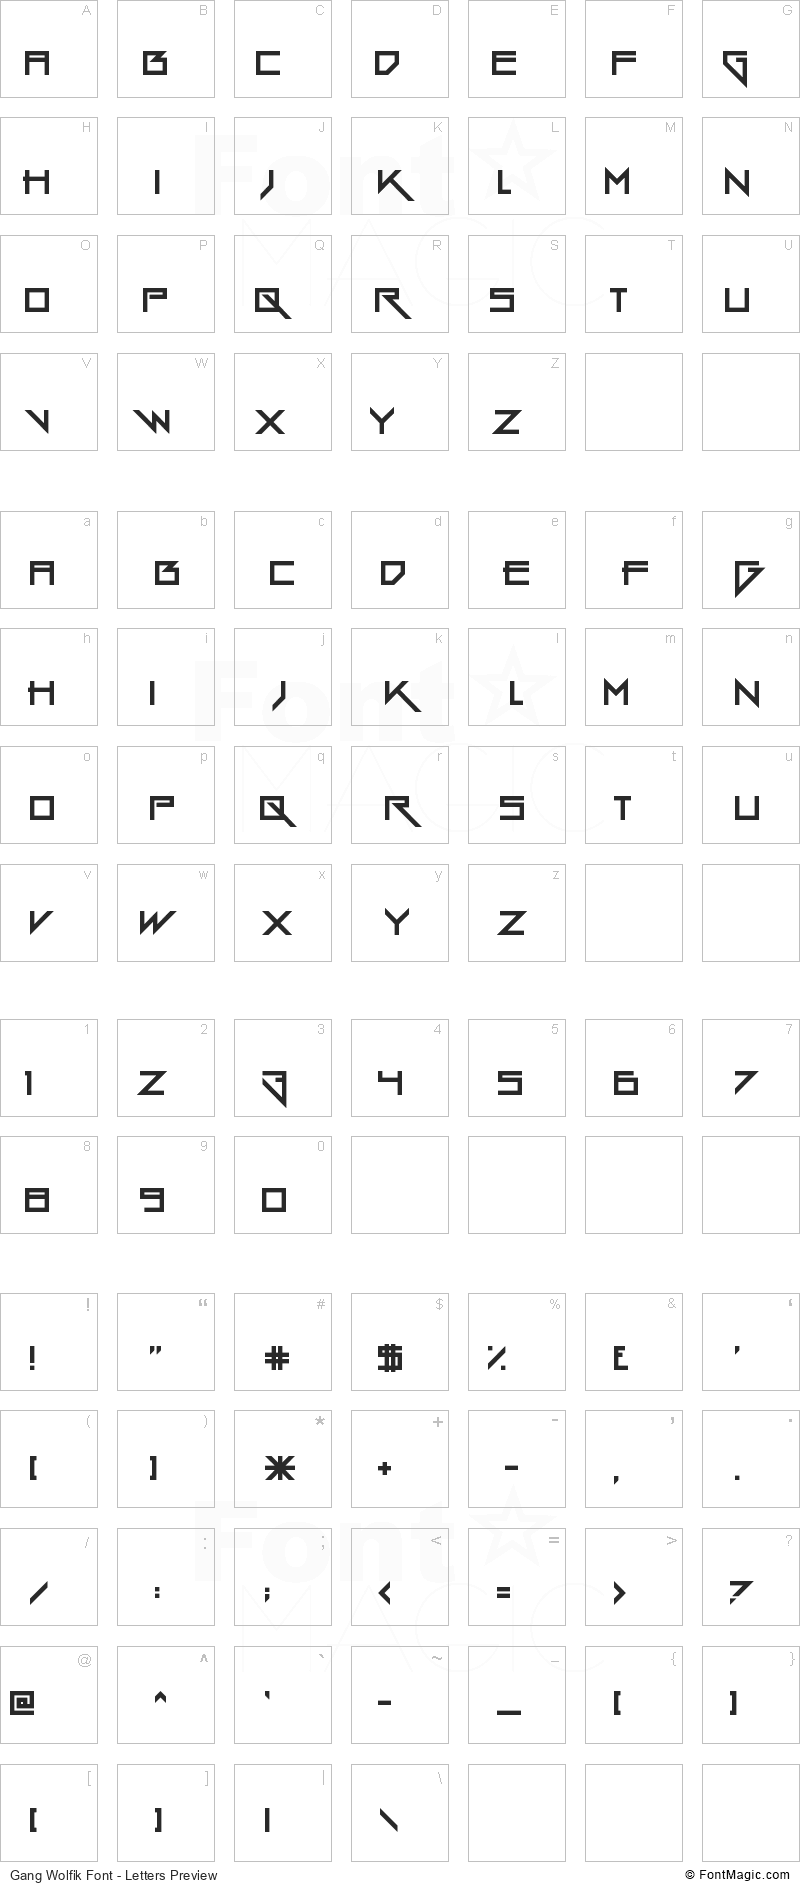 Gang Wolfik Font - All Latters Preview Chart